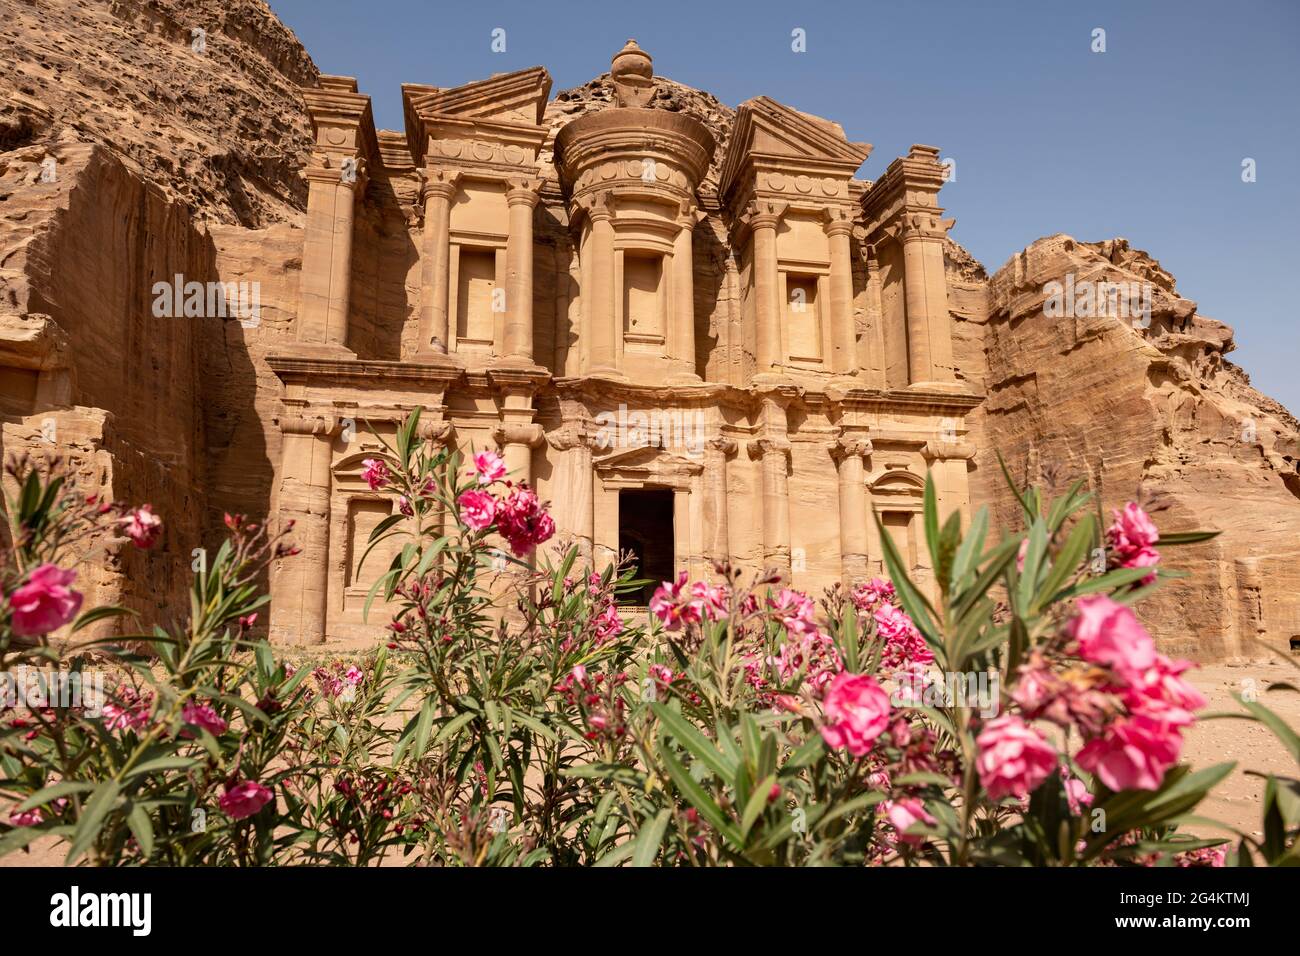 Ad Deir popularly known as ‘The Monastery’ is a monumental building carved out of rock in the ancient Jordanian city of Petra. Jordan Stock Photo